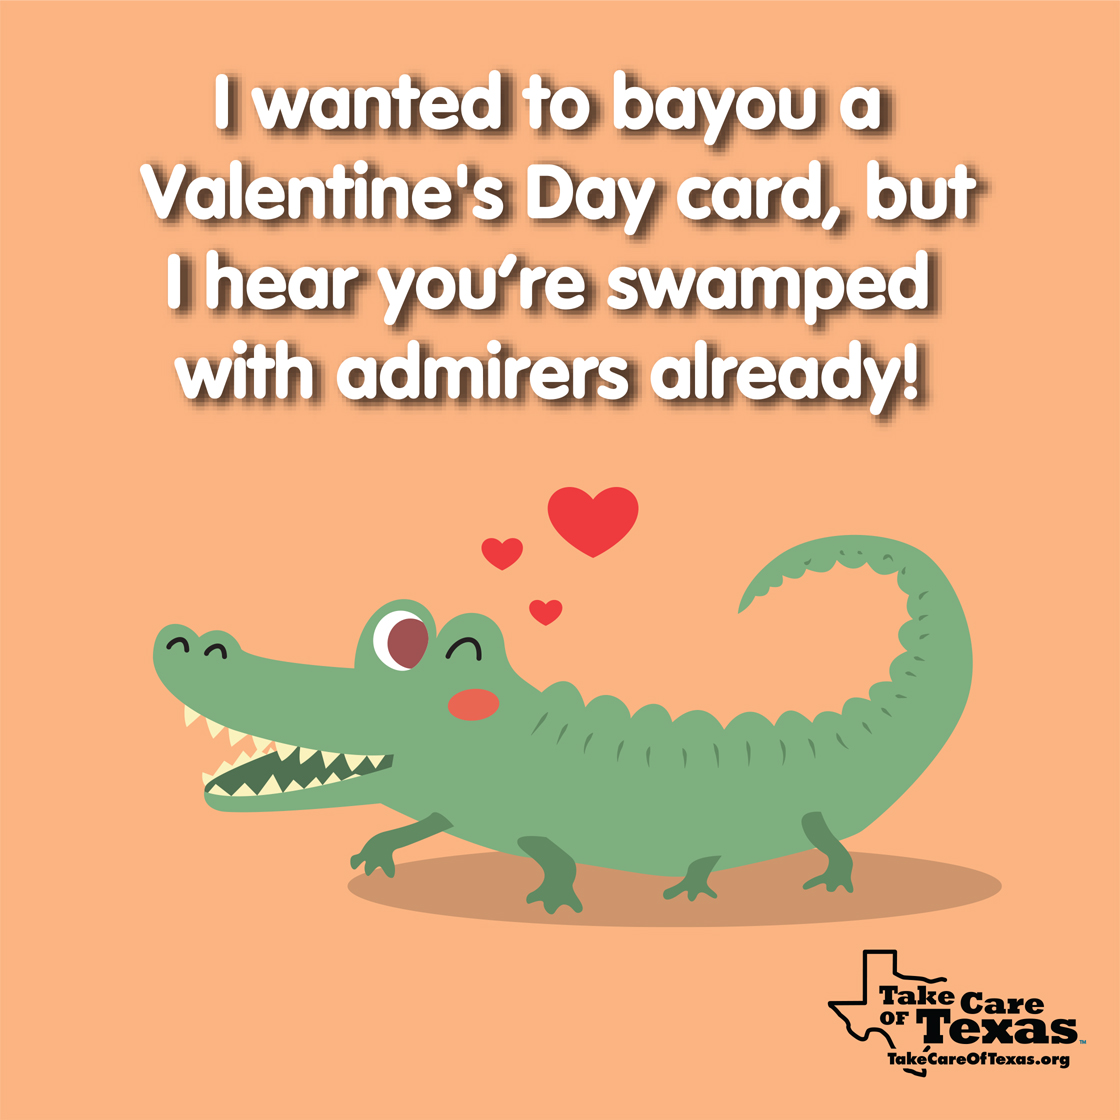 Alligator with the text "I wanted to Bayou a Valentine's Day card, but I hear you're swamped with admirers already"